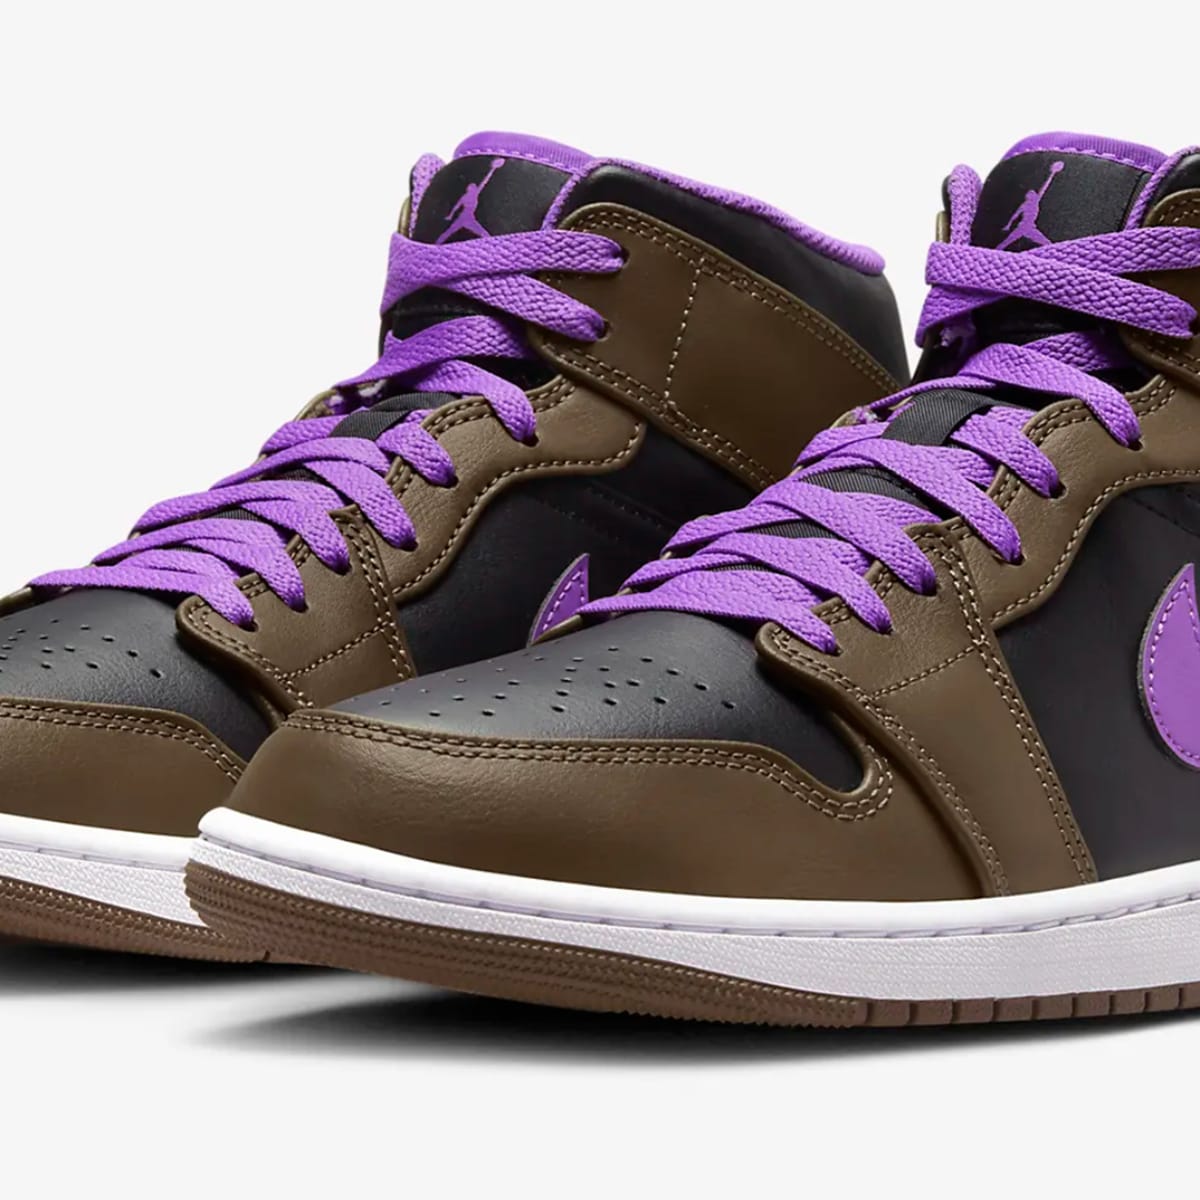 Air Jordan 1 Mids Have a New Colorway for Your Collection - Men's